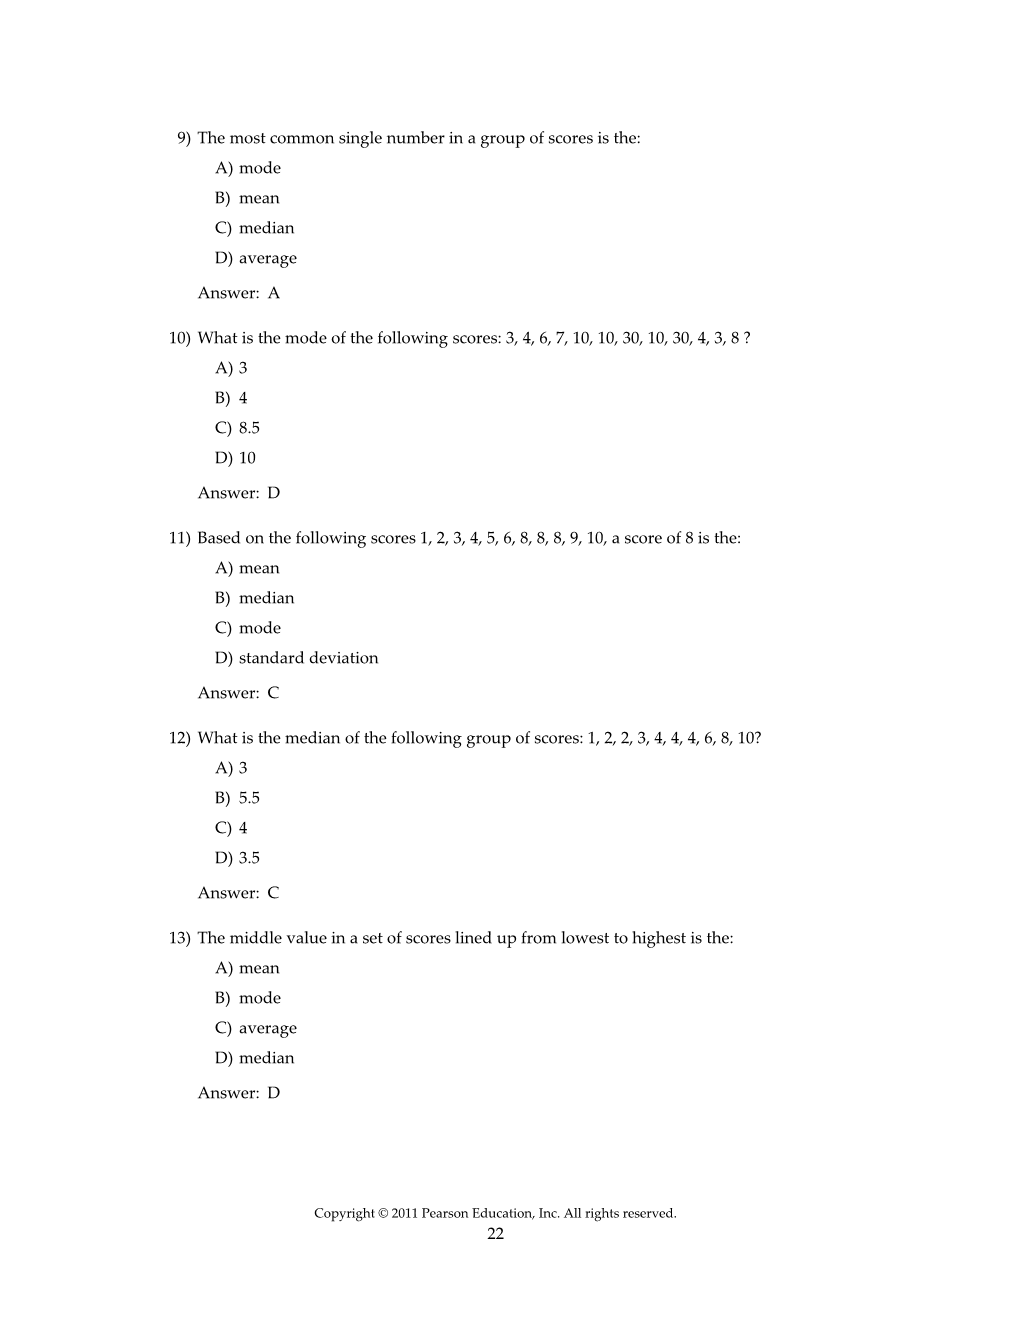 Chapter 2 the Mean, Variance, Standard Deviation, and Z Scores